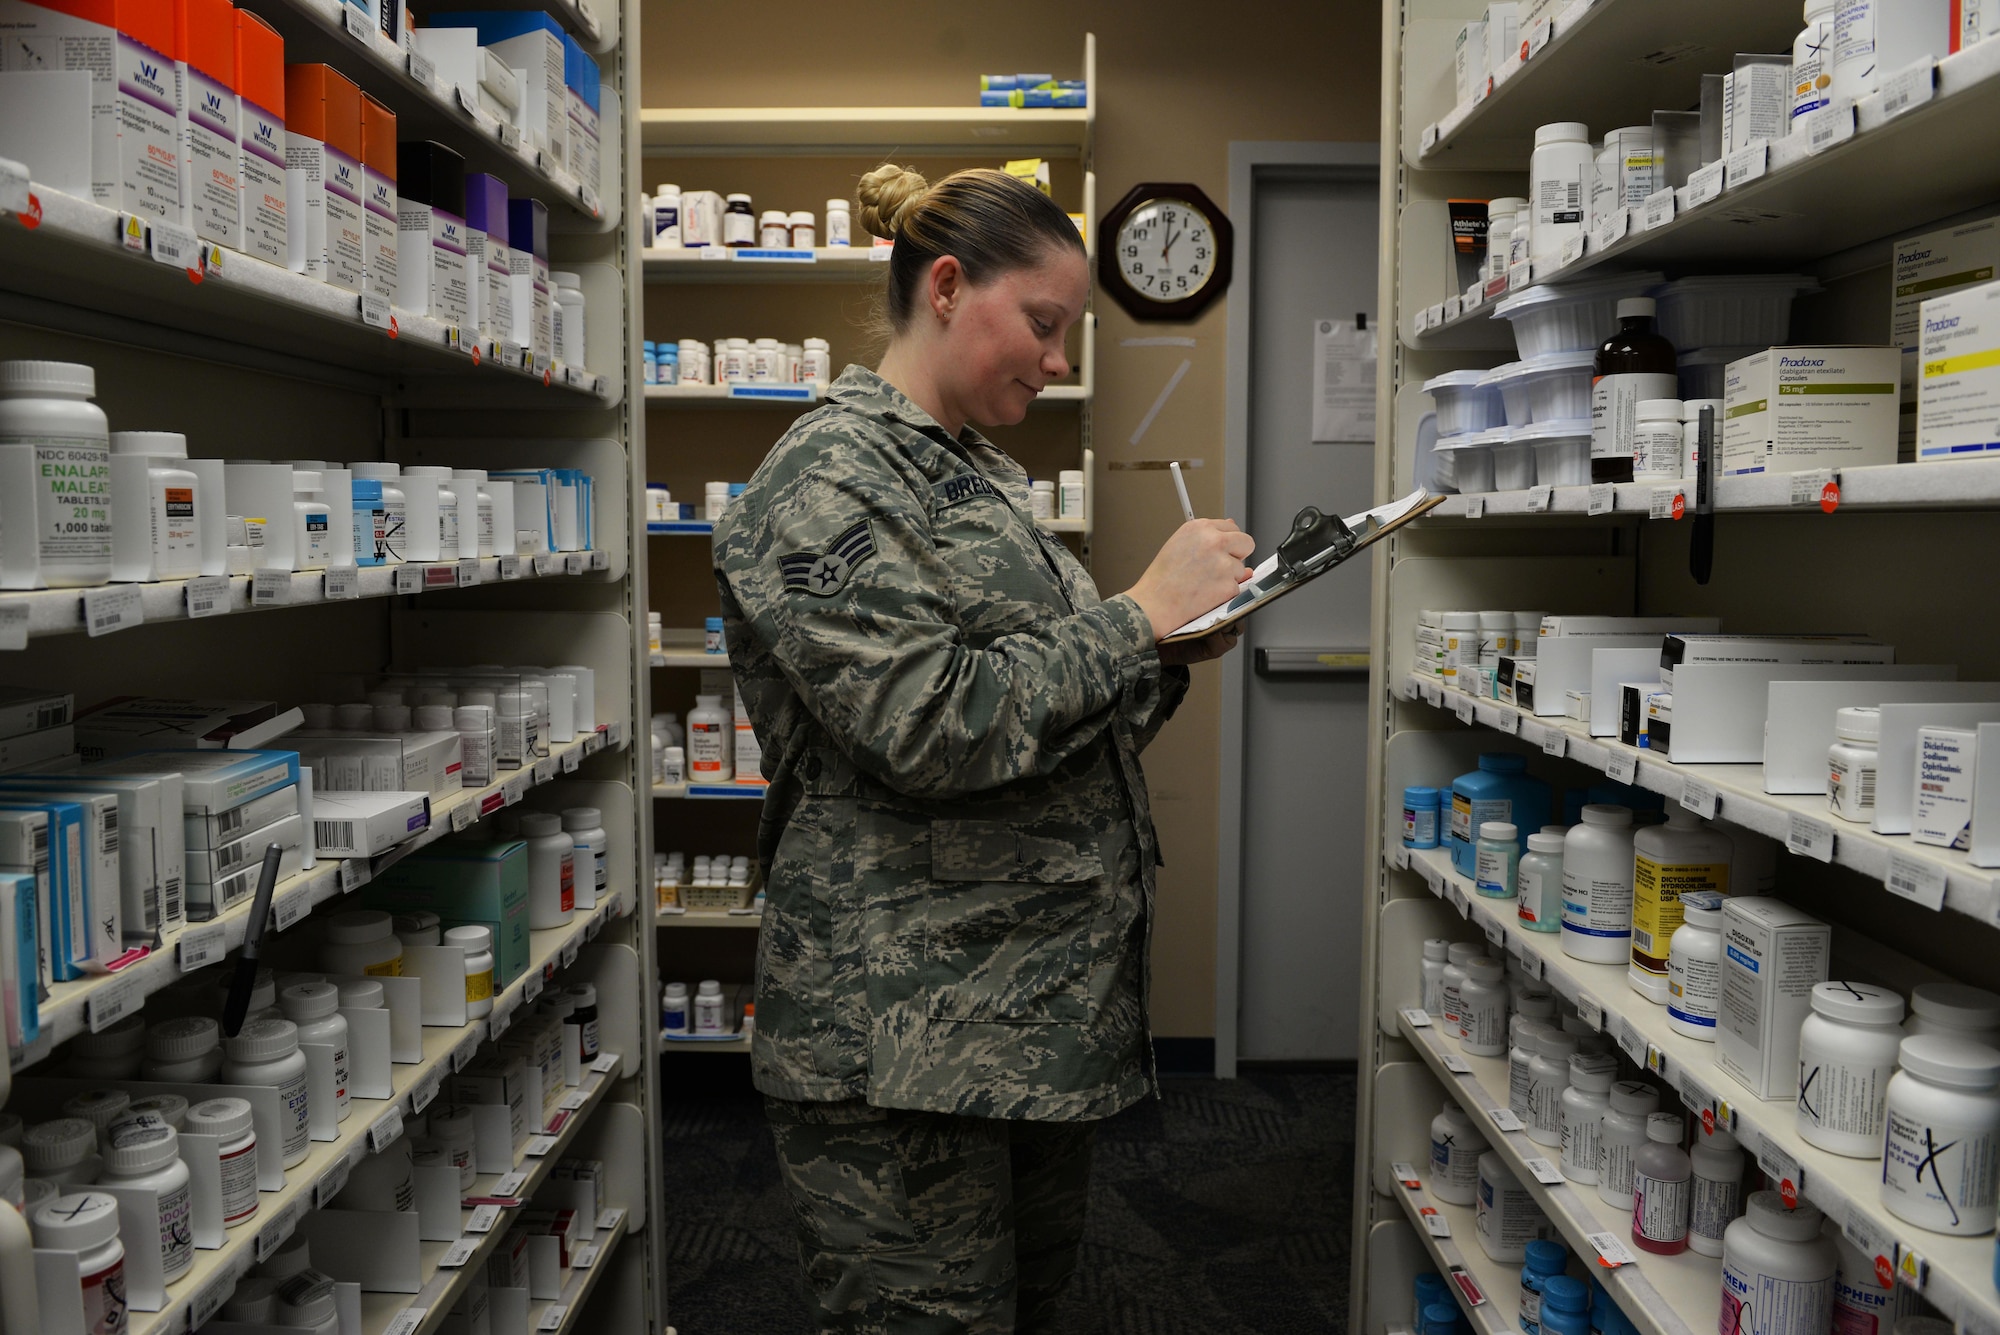 Senior Airman Erica Bredwell, 19th Medical Support Squadron pharmacy technician, catalogues medication Aug. 23, 2017 at Little Rock Air Force Base, Ark. The pharmacy maintains approximately 1,000 line items at any given time. (U.S. Air Force photo by Airman Rhett Isbell)